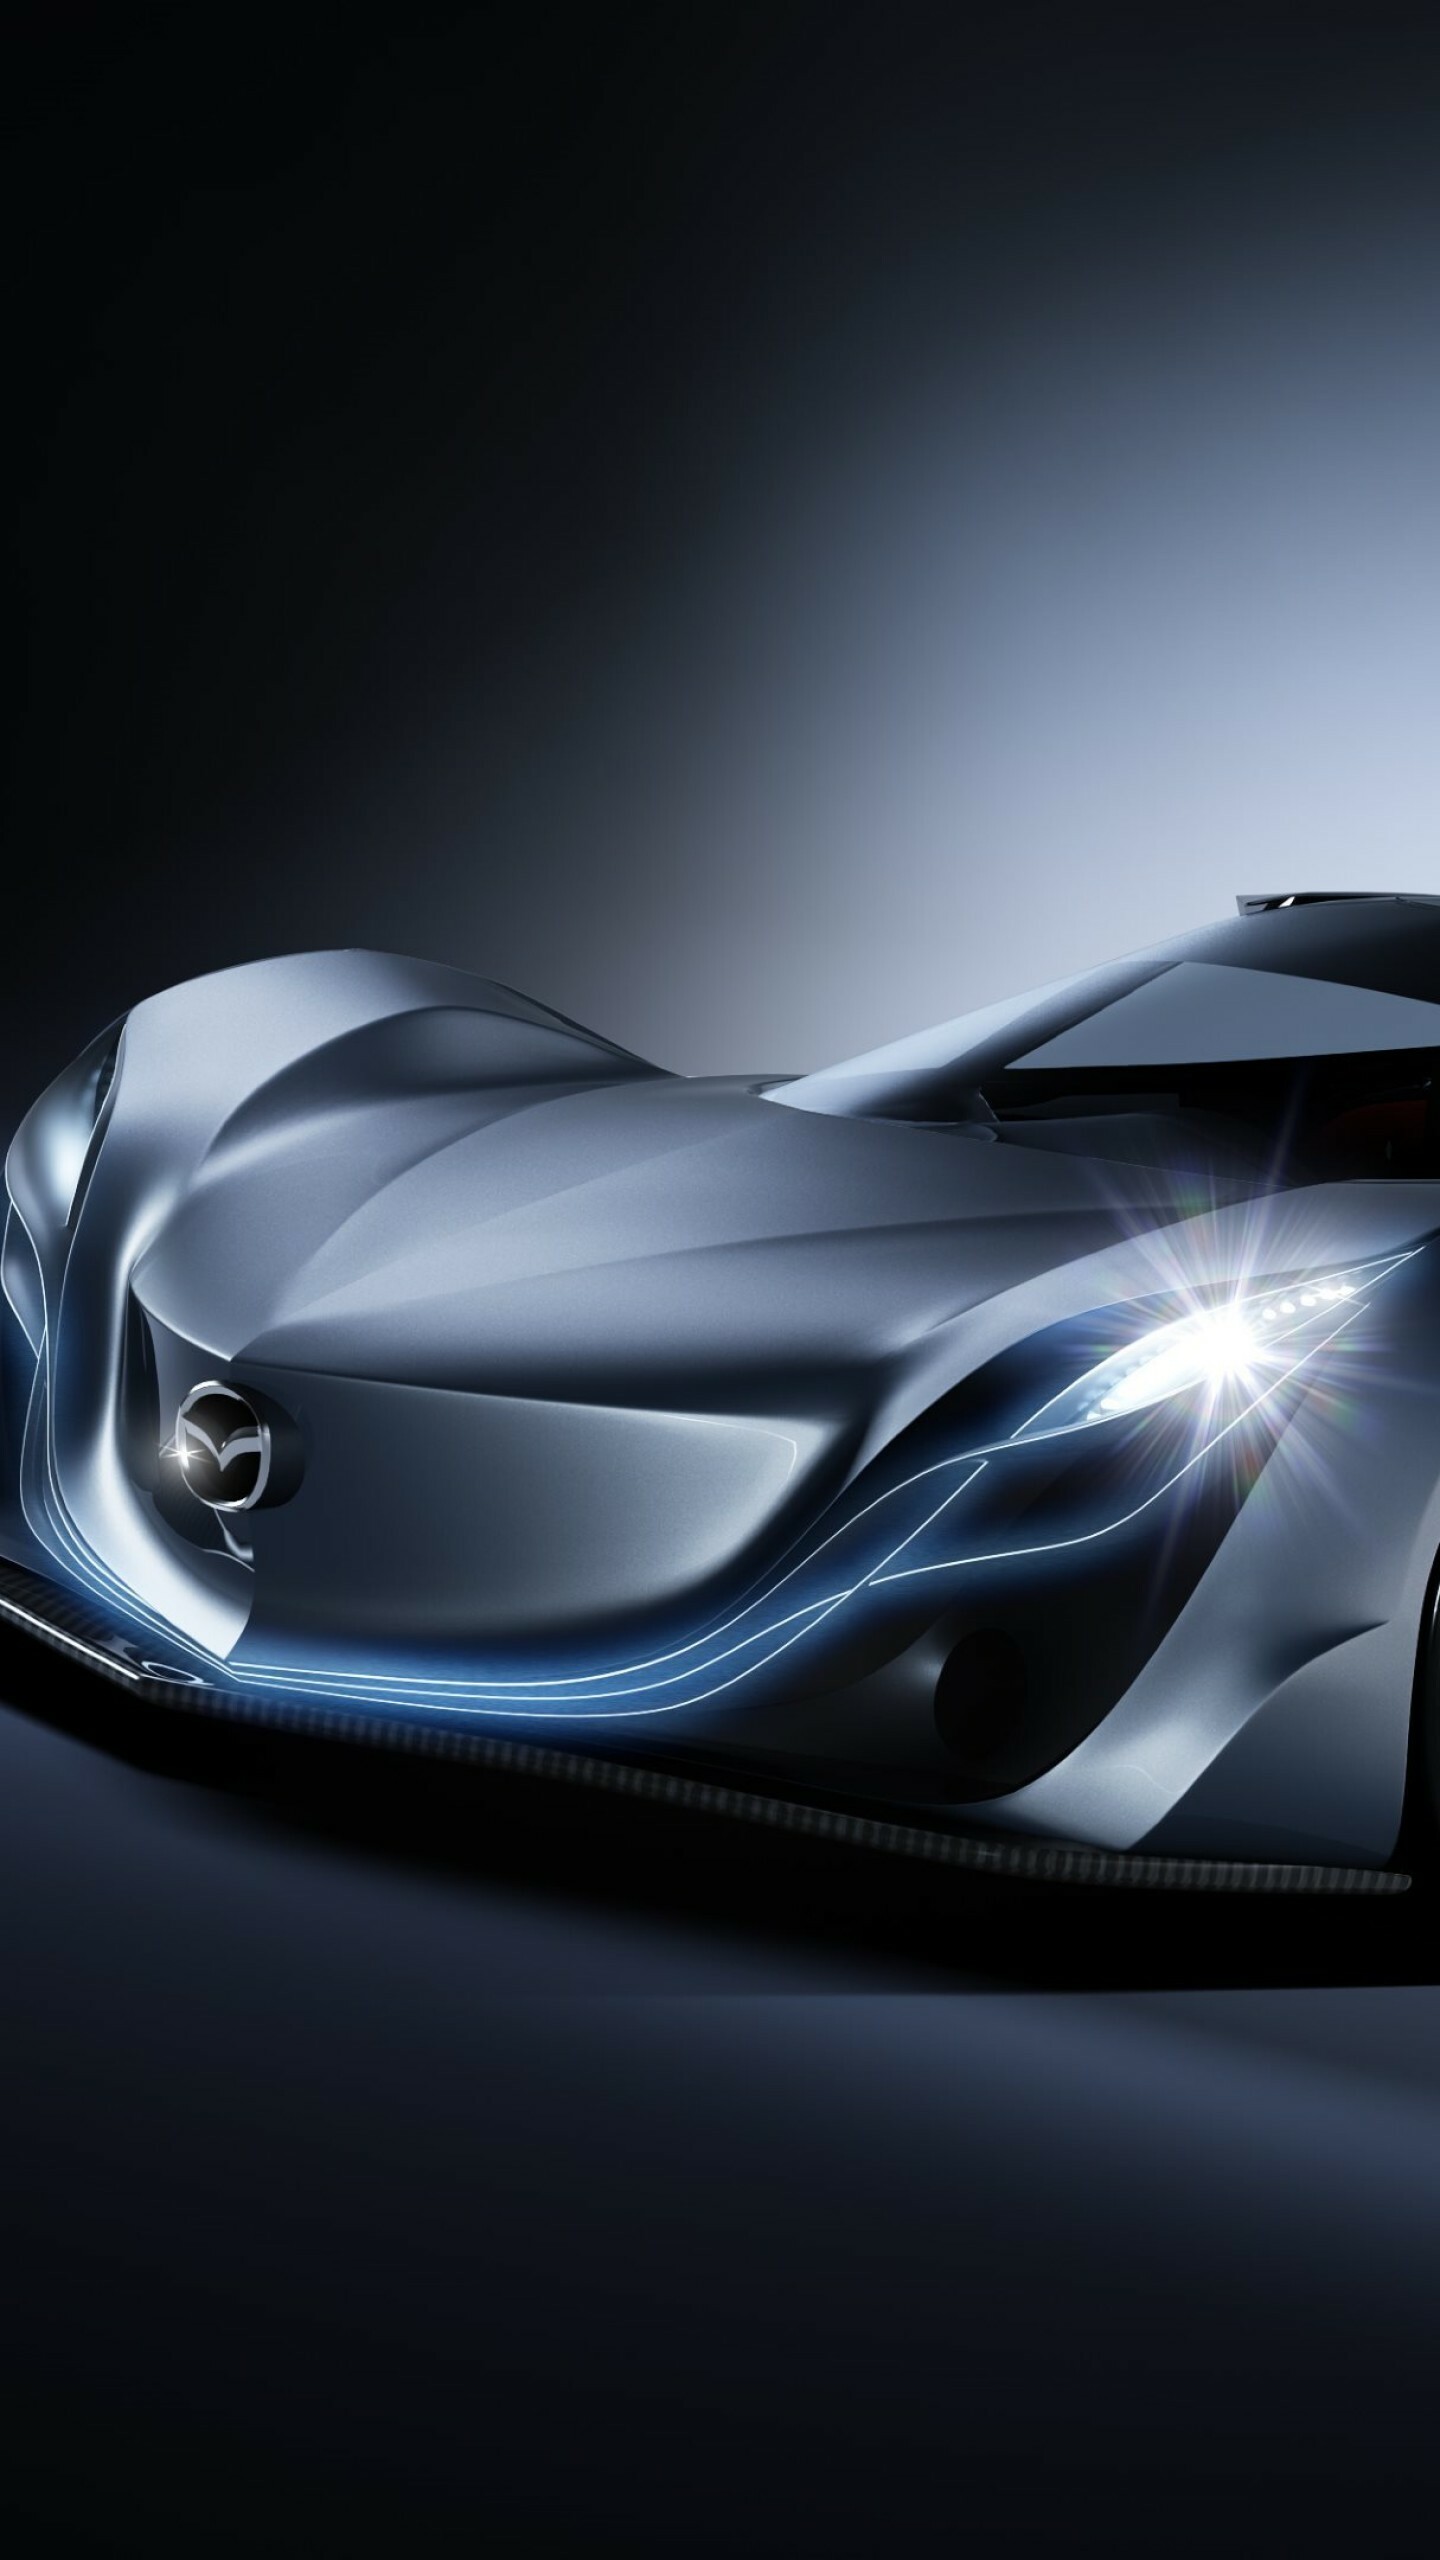 Mazda: Furai, A concept car revealed on 27 December 2007 and designed by Swift Engineering, Sport car. 1440x2560 HD Background.